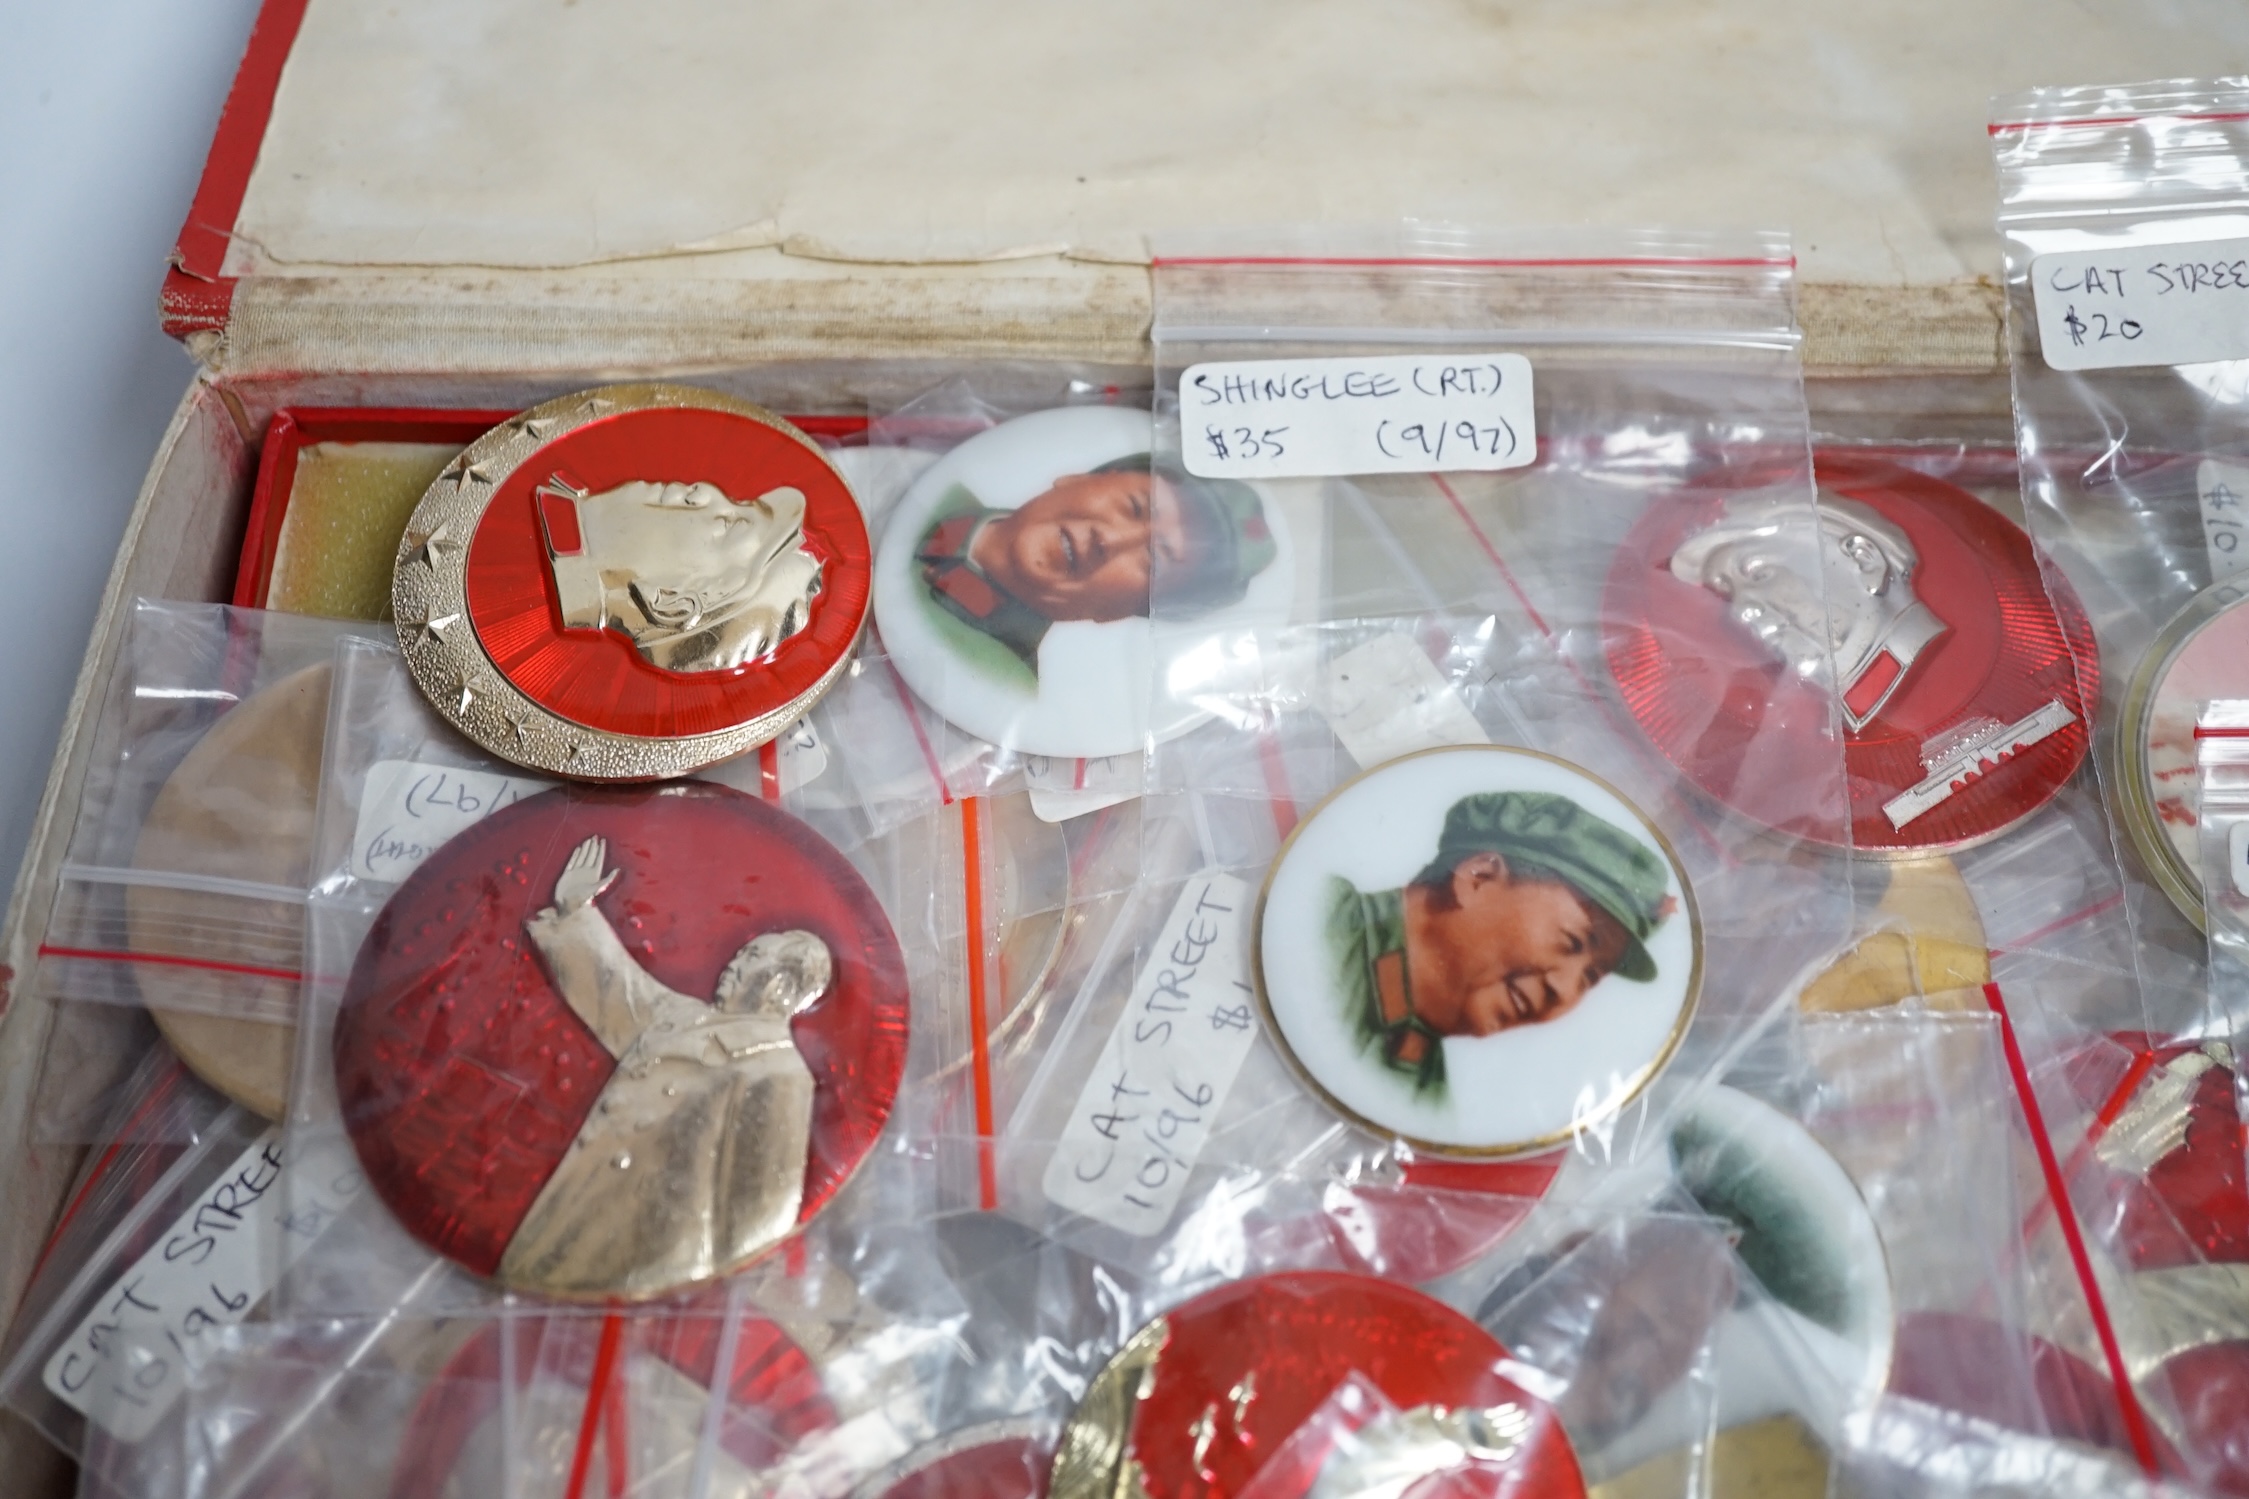 A collection of forty one Chinese Mao Zedong badges and a box